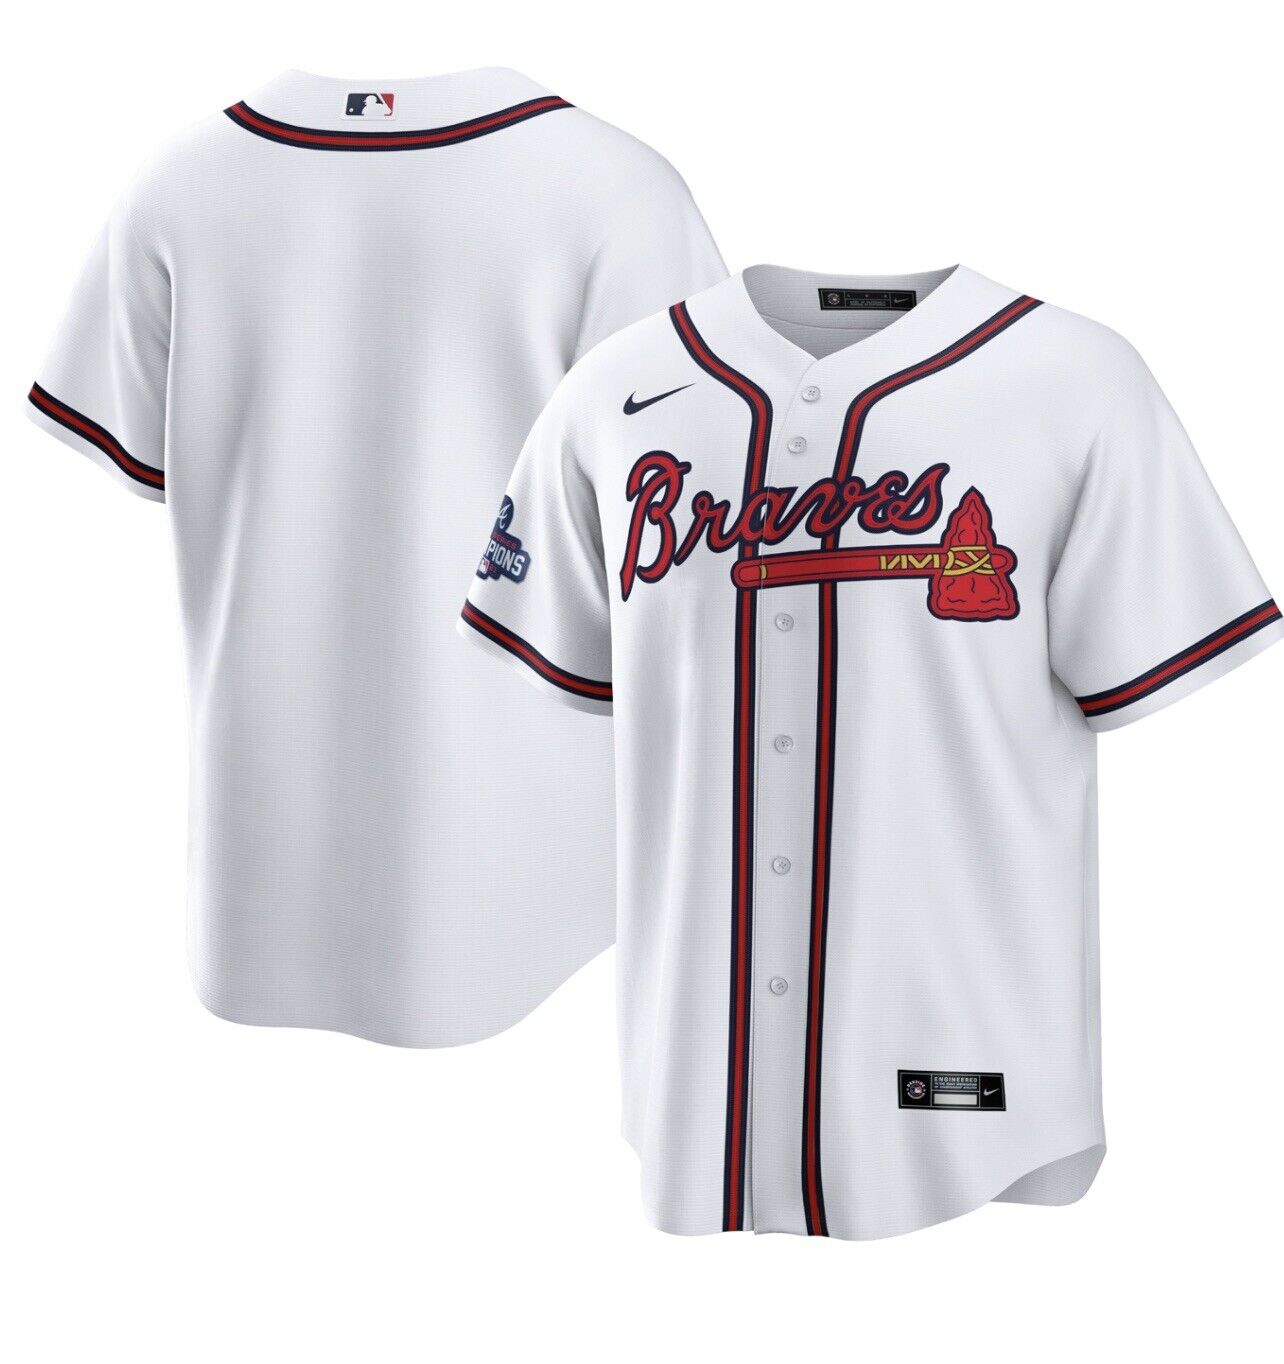 Atlanta Braves 2021 World Series Jersey Brand New with Tag Size XL